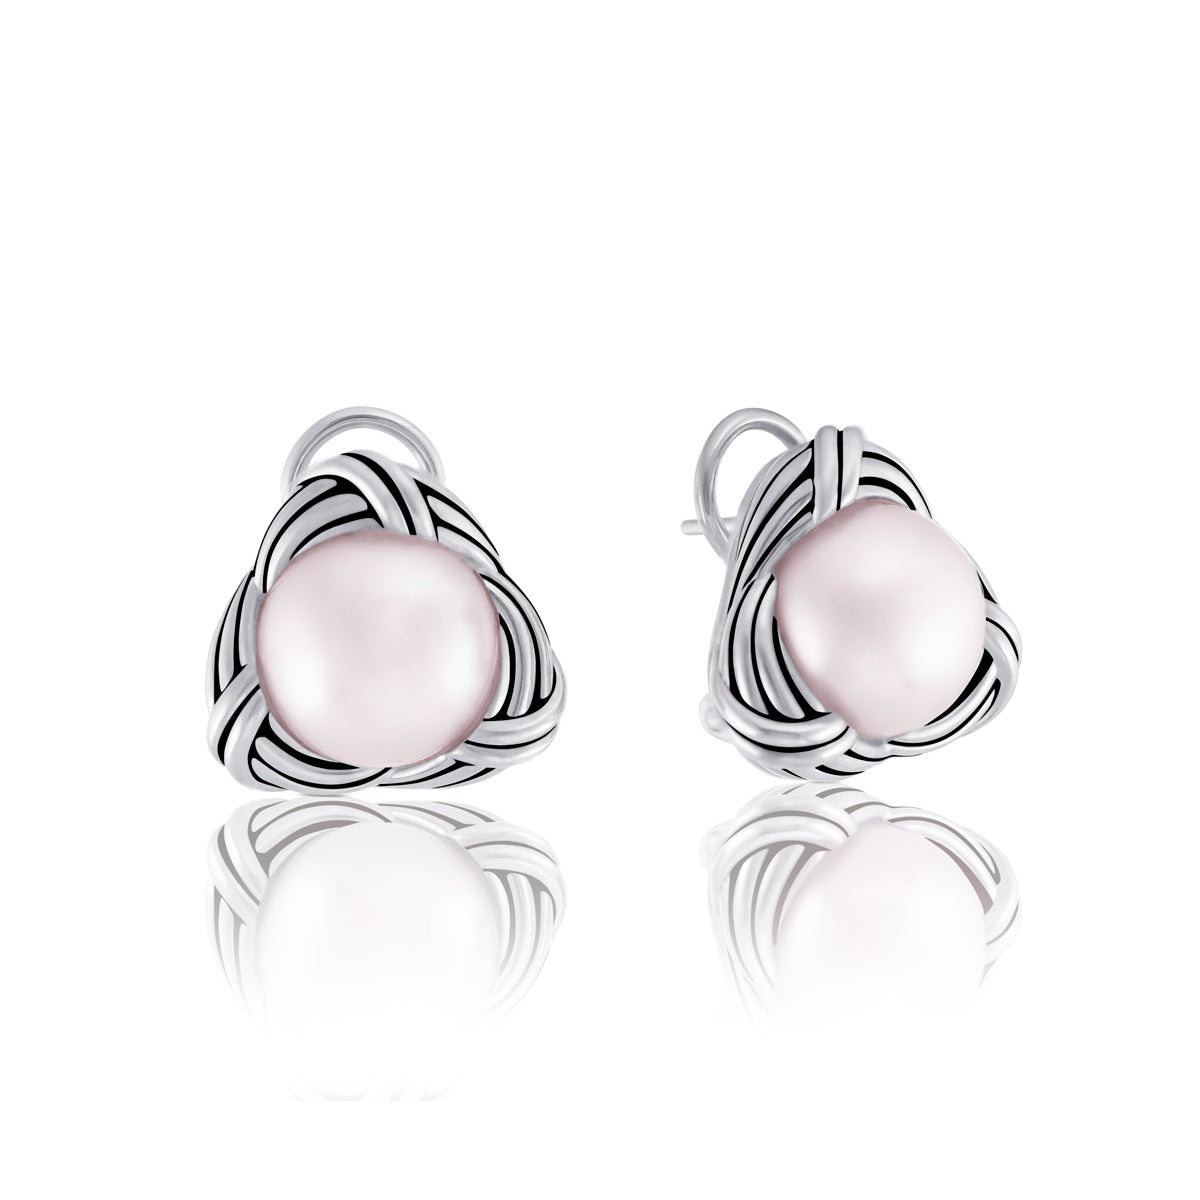 Park Love Knot Earrings in sterling silver with pink pearls 12mm